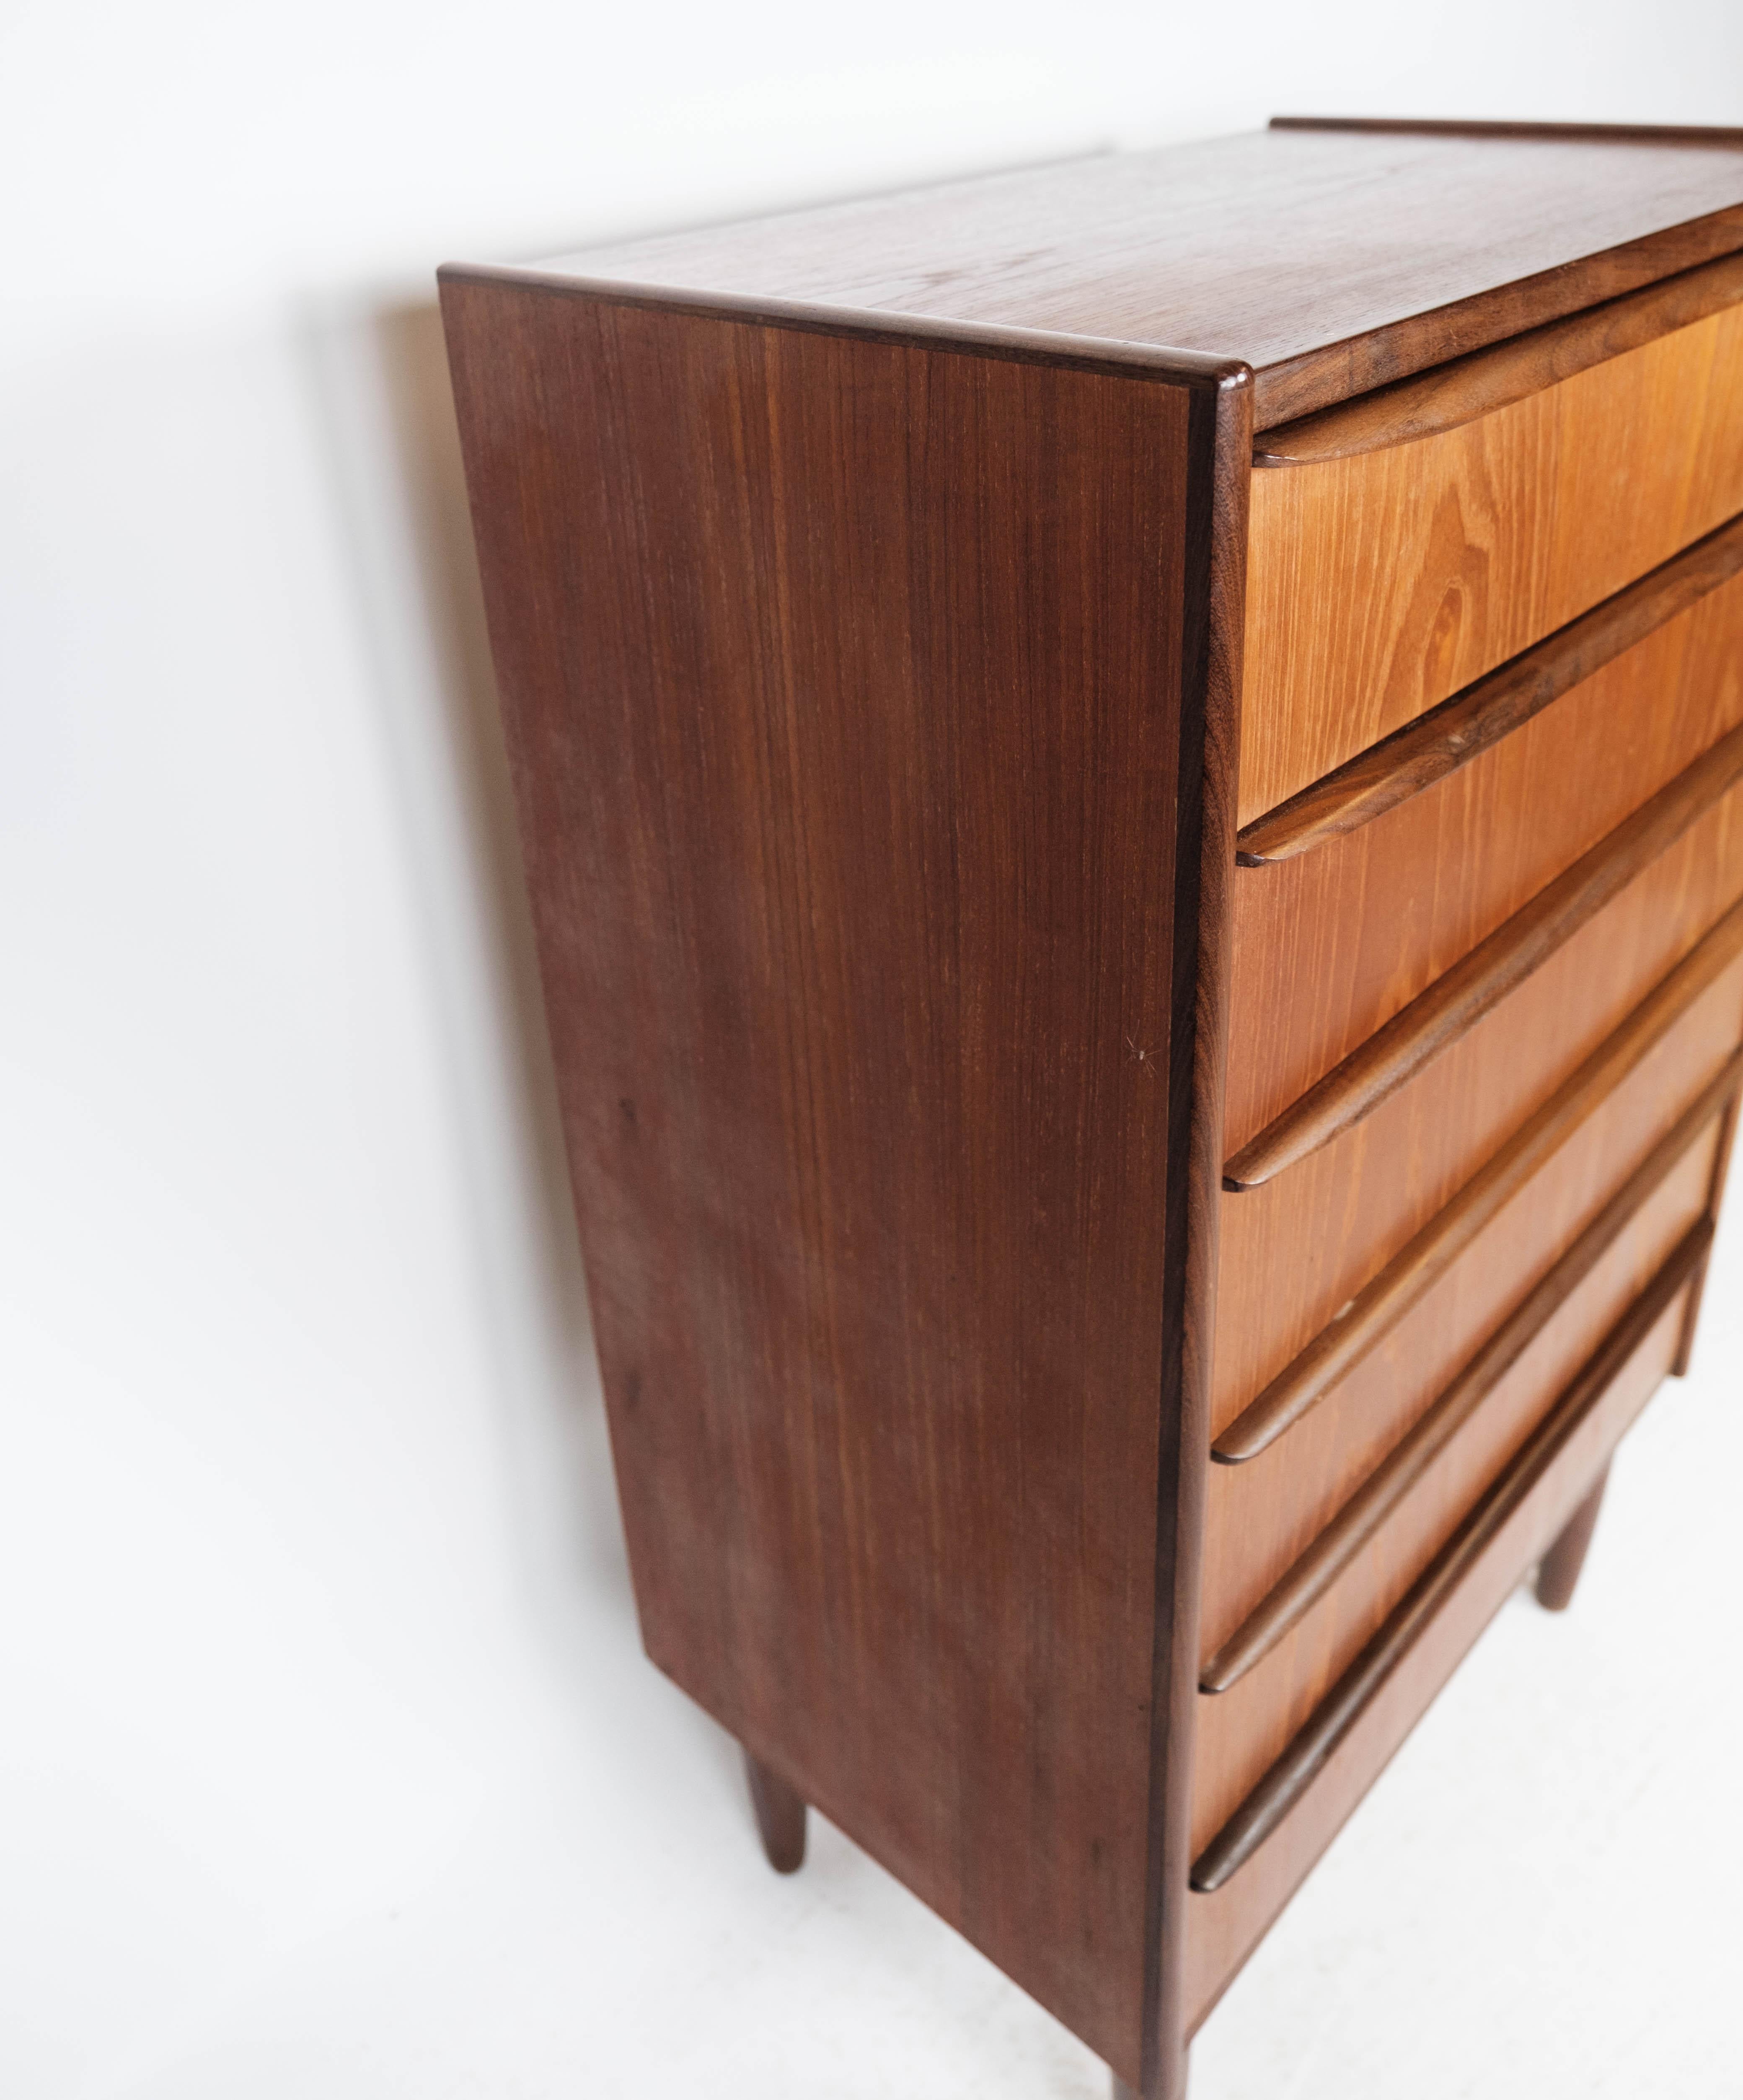 Mid-20th Century Chest of Drawers in Teak with Six Drawers, of Danish Design from the 1960s